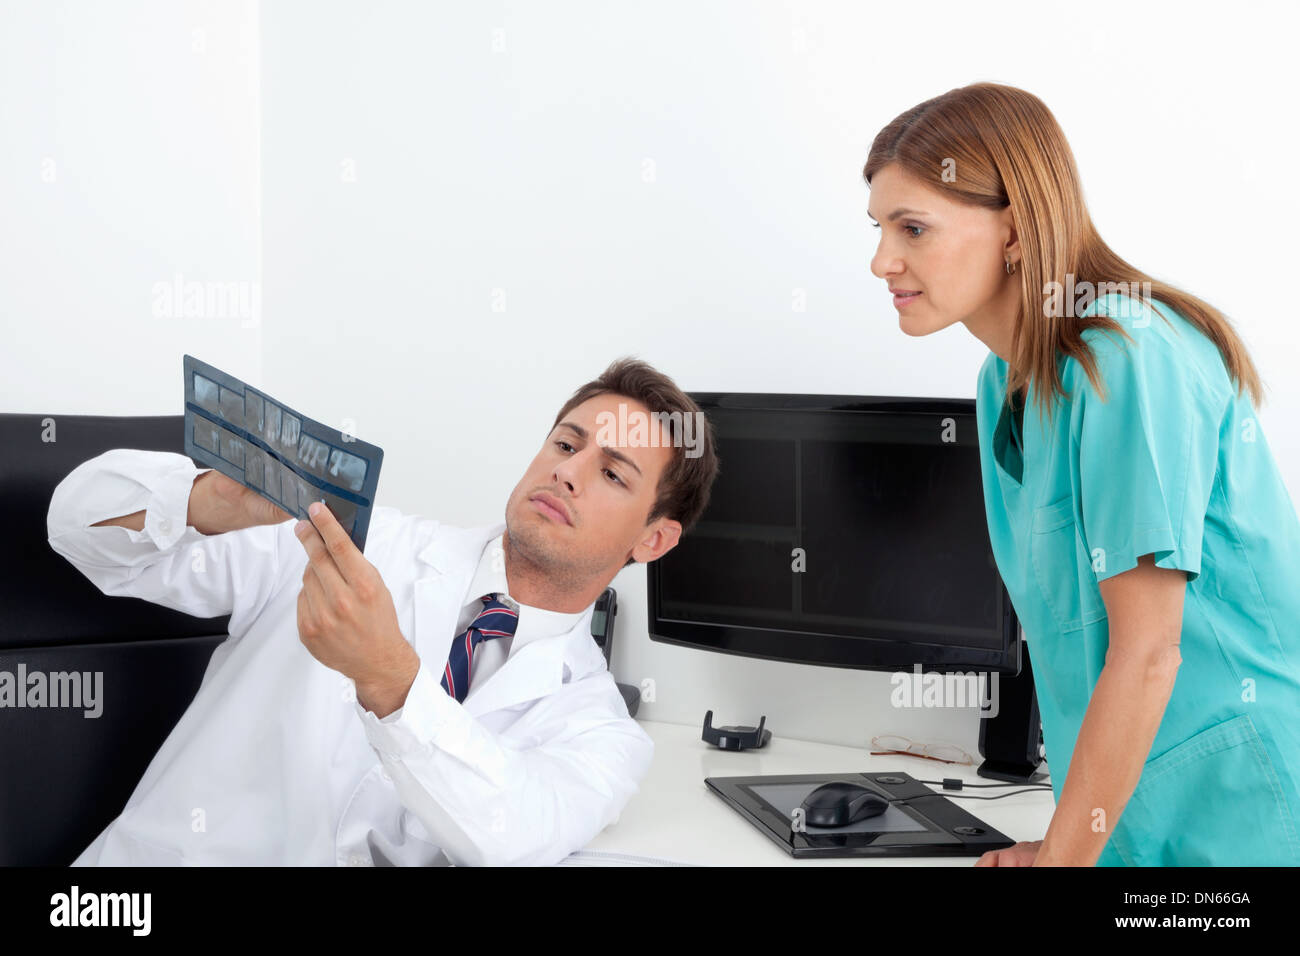 Dentist Analyzing X-Ray With Assistant Stock Photo